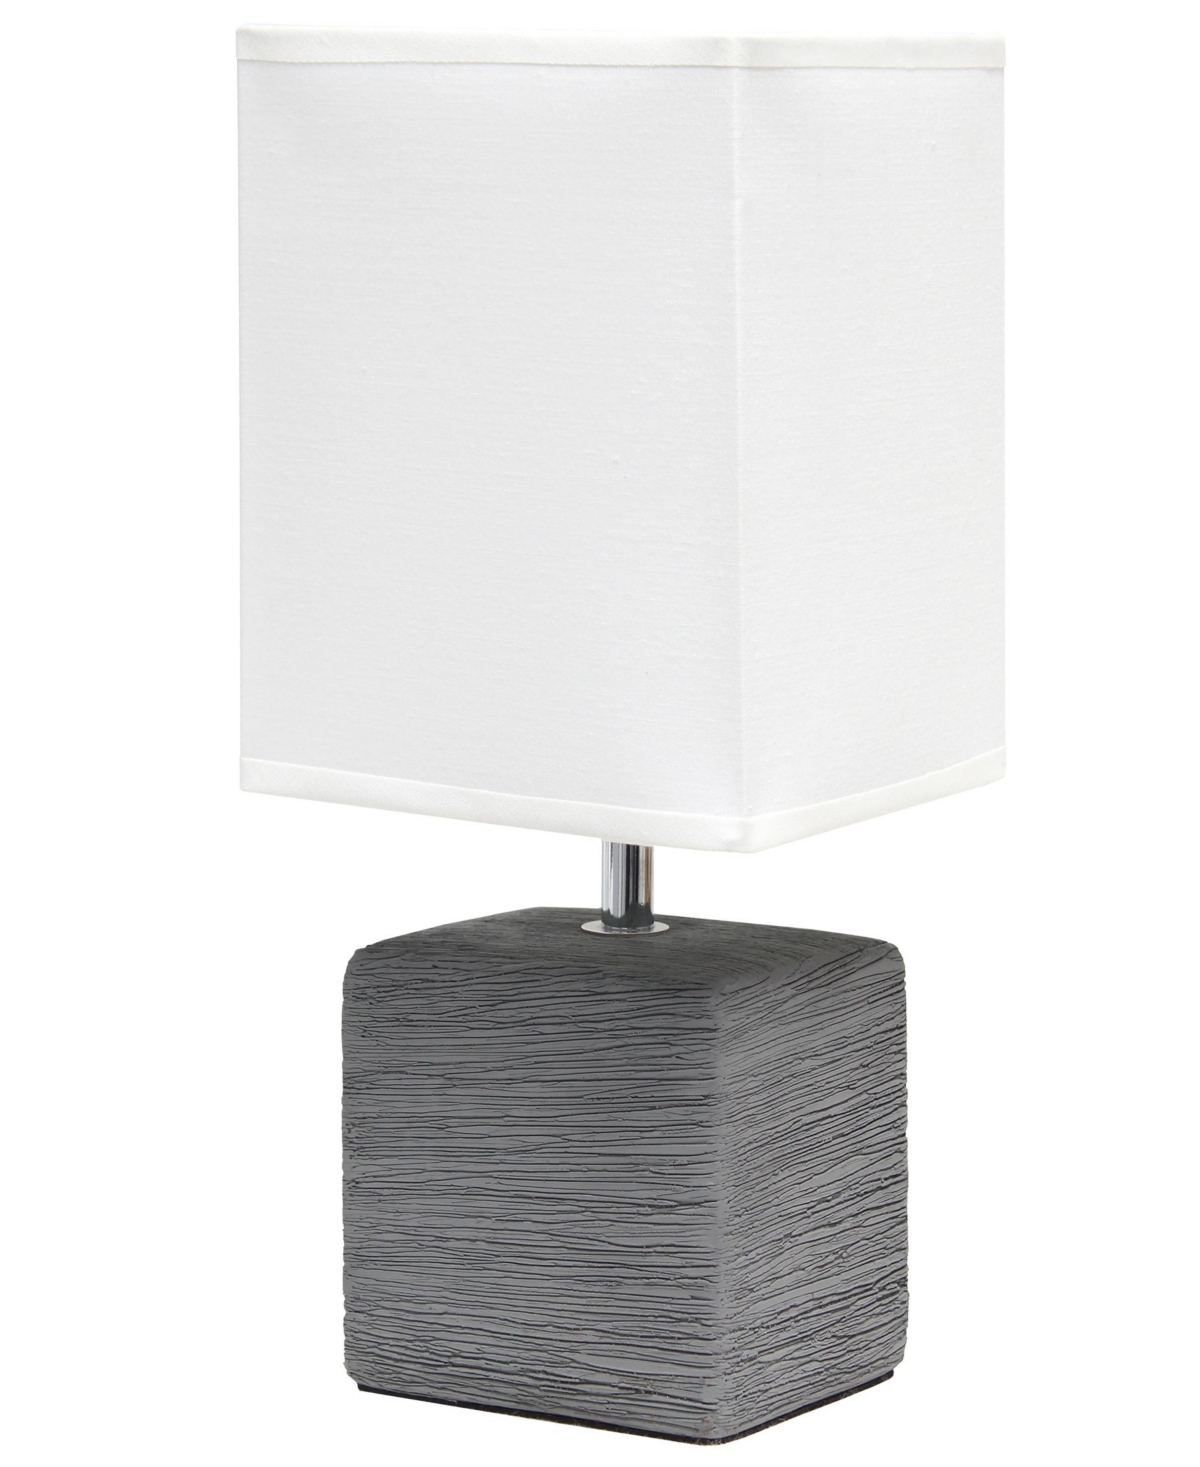 Simple Designs Petite Stone Table Lamp With Shade In Gray Base,white Shade